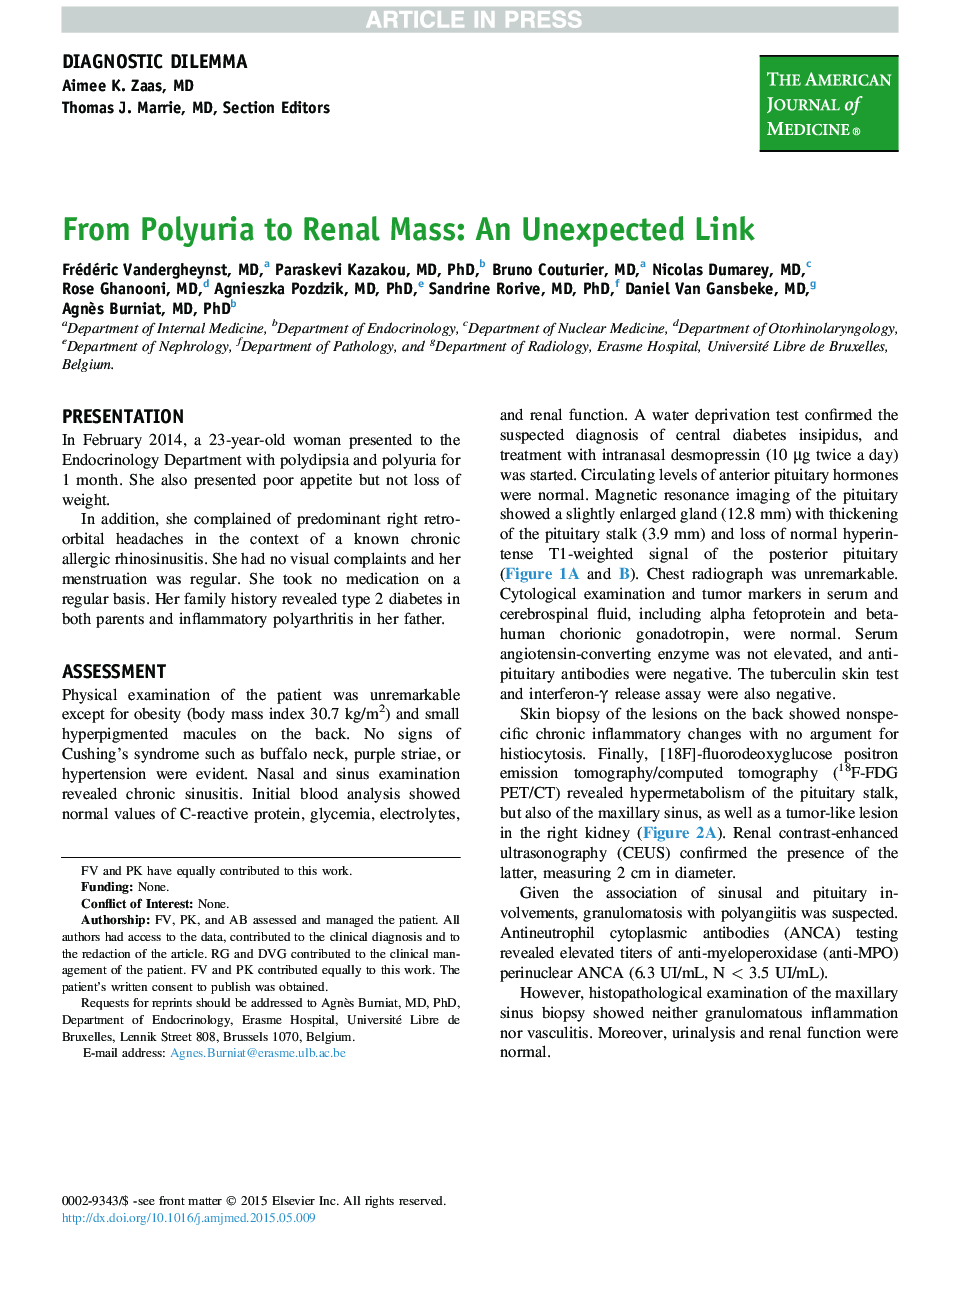 From Polyuria to Renal Mass: An Unexpected Link